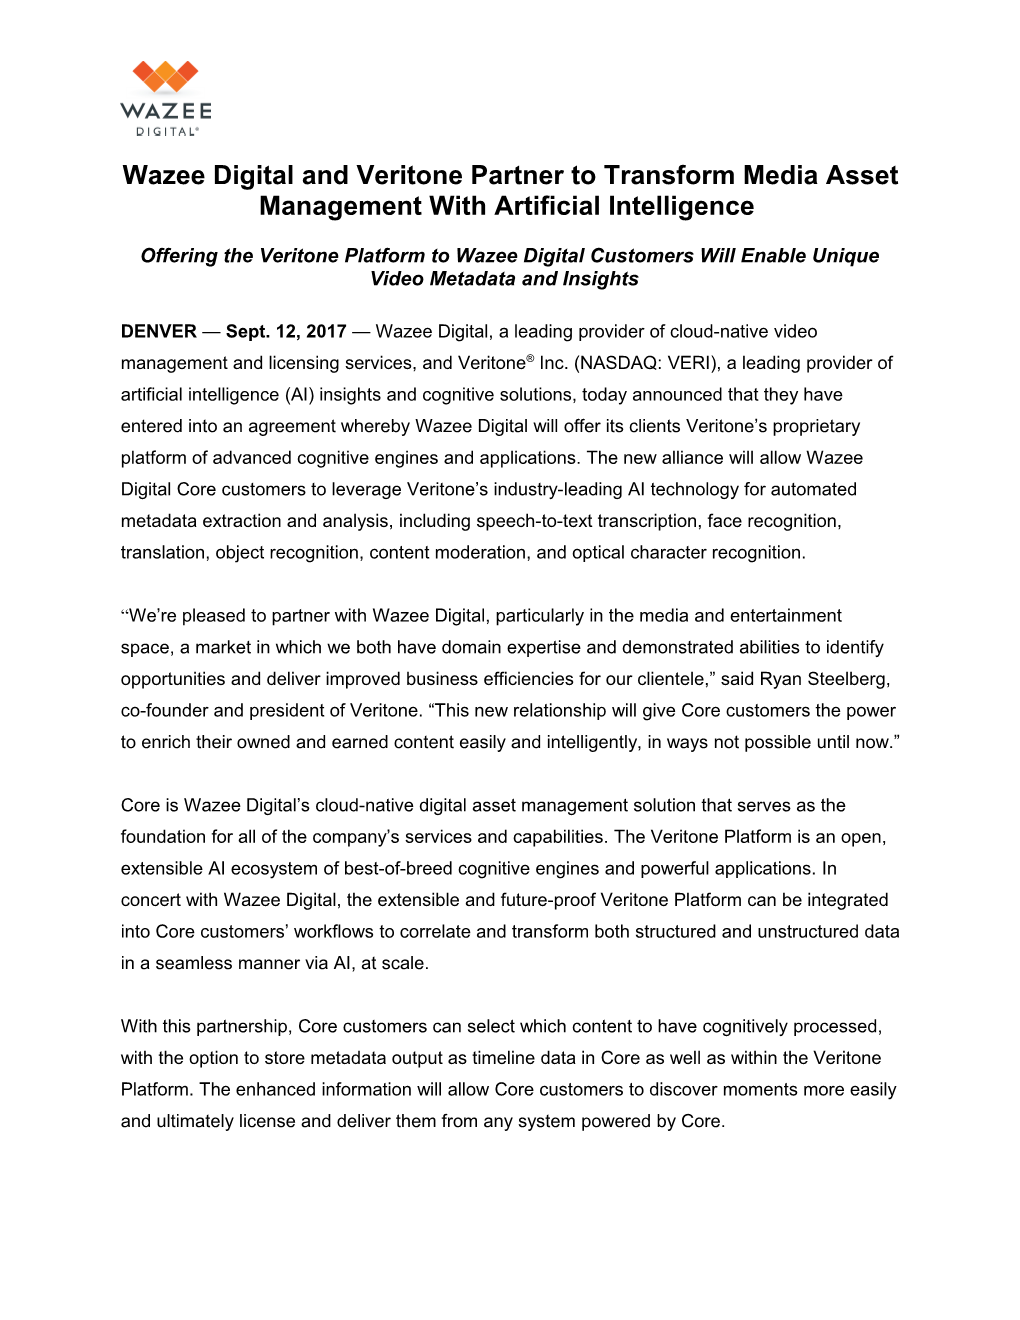 Wazee Digital and Veritone Partner to Transform Media Asset Management Withartificial